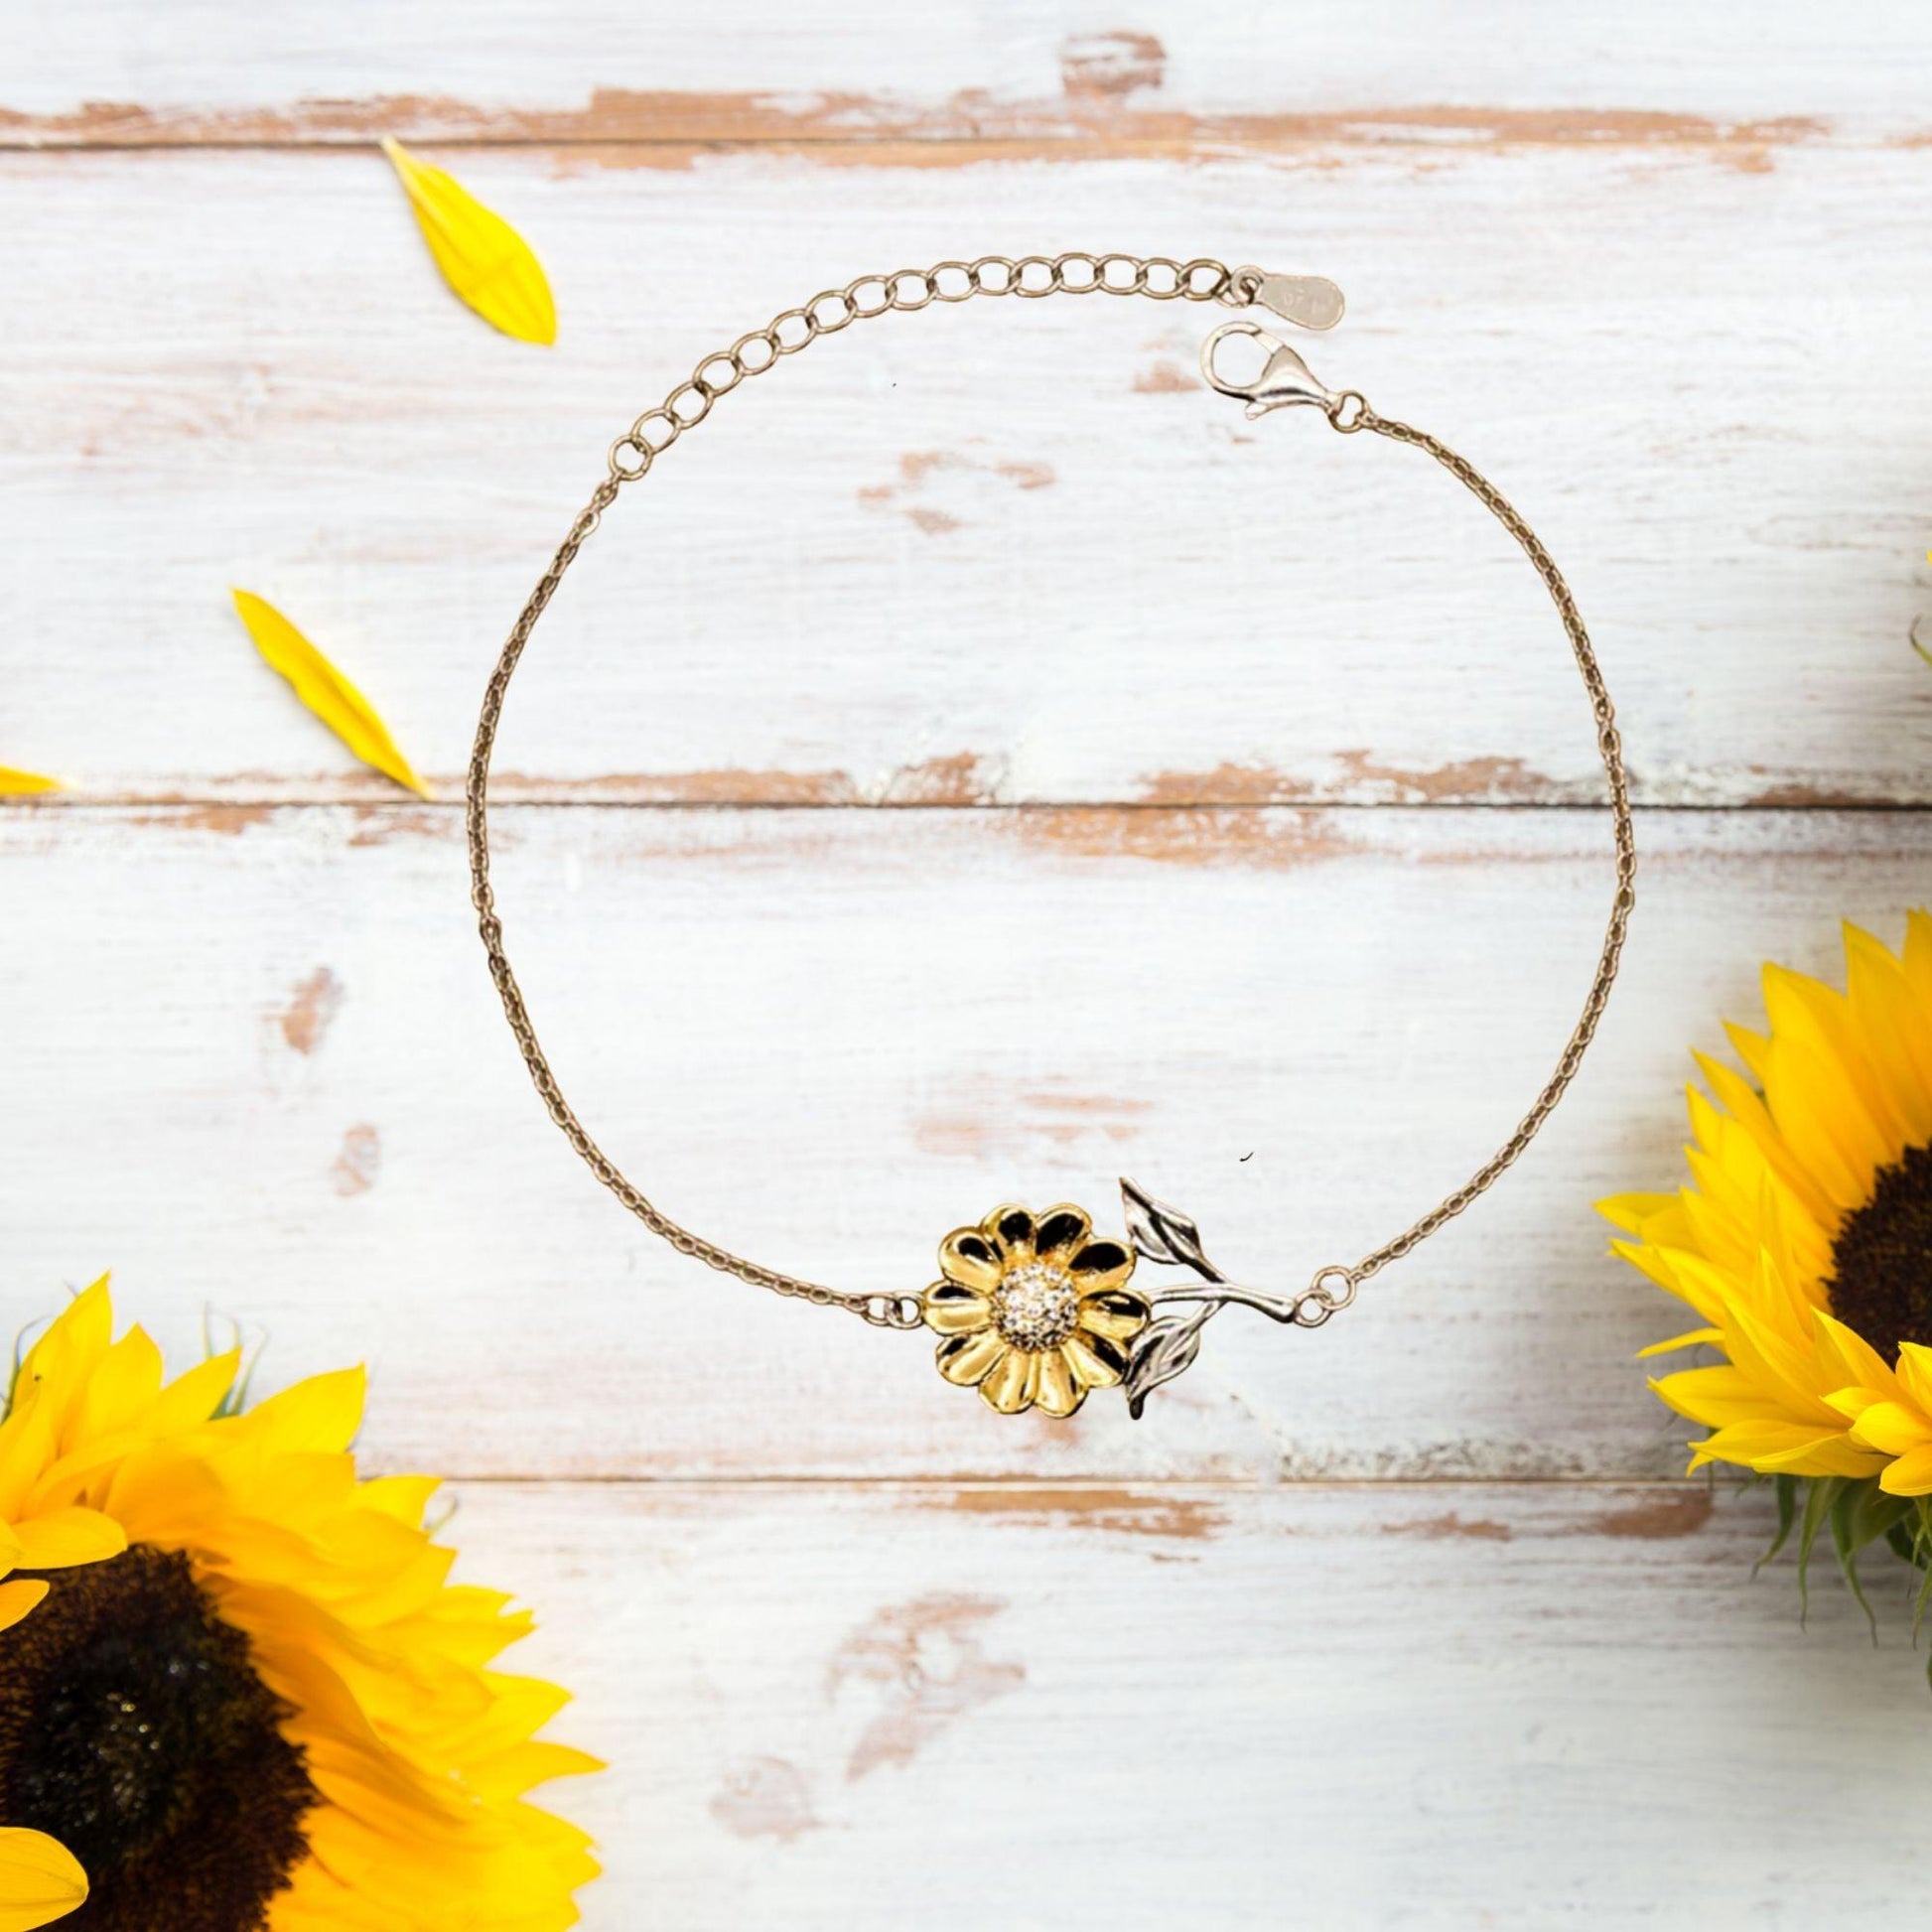 Remarkable Personal Care Aide Gifts, Your dedication and hard work, Inspirational Birthday Christmas Unique Sunflower Bracelet For Personal Care Aide, Coworkers, Men, Women, Friends - Mallard Moon Gift Shop